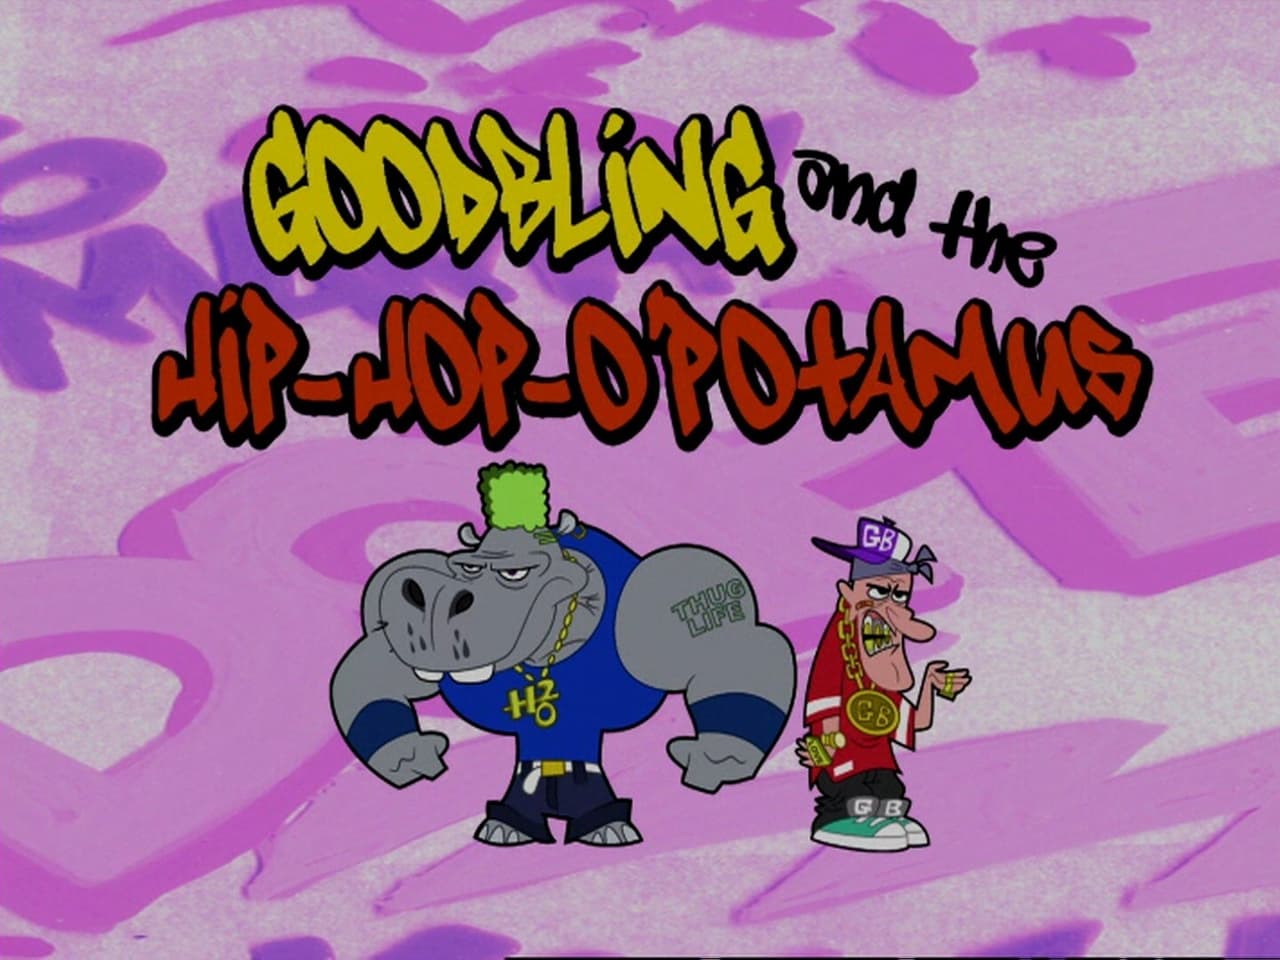 The Grim Adventures of Billy and Mandy - Season 6 Episode 20 : Goodbling and the Hip-Hop-Opotamus